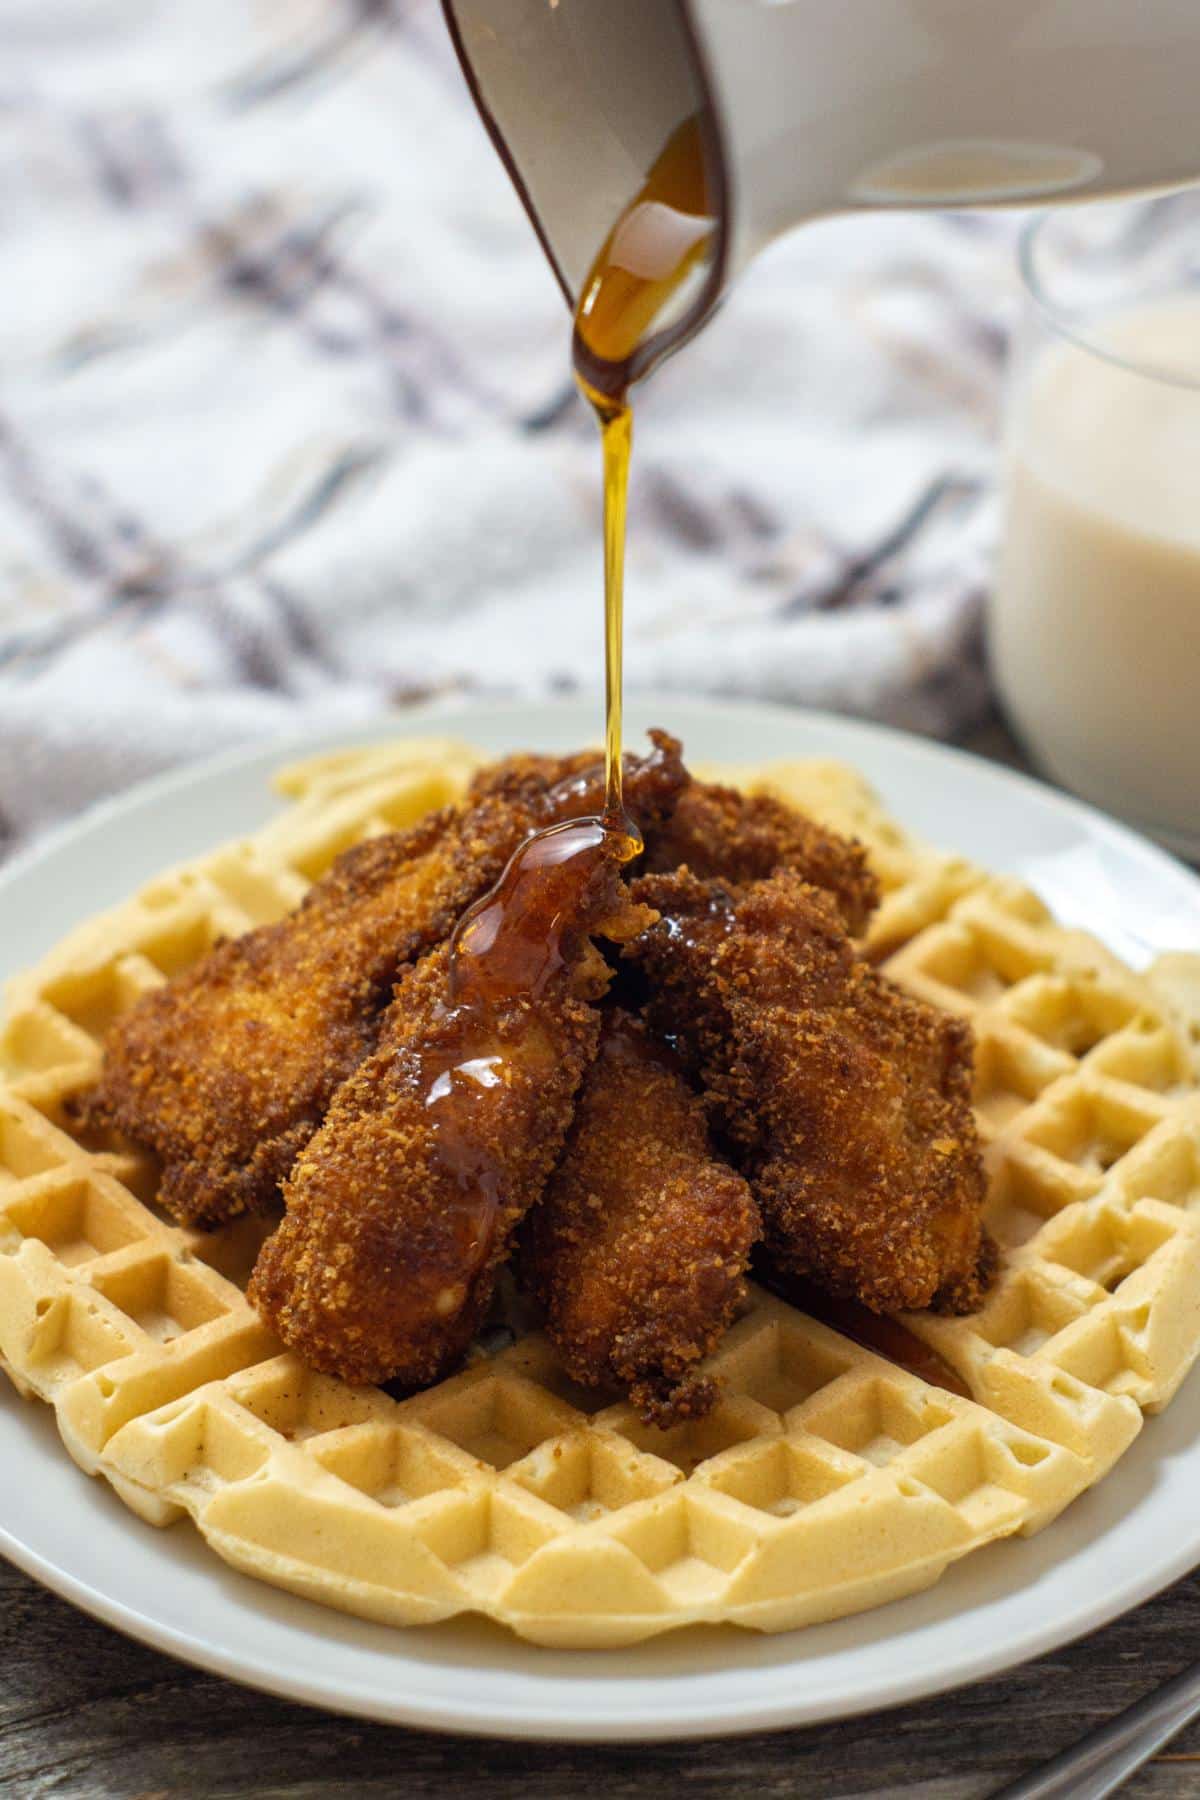 Southern chicken and waffles with maple syrup being poured onto a plate.